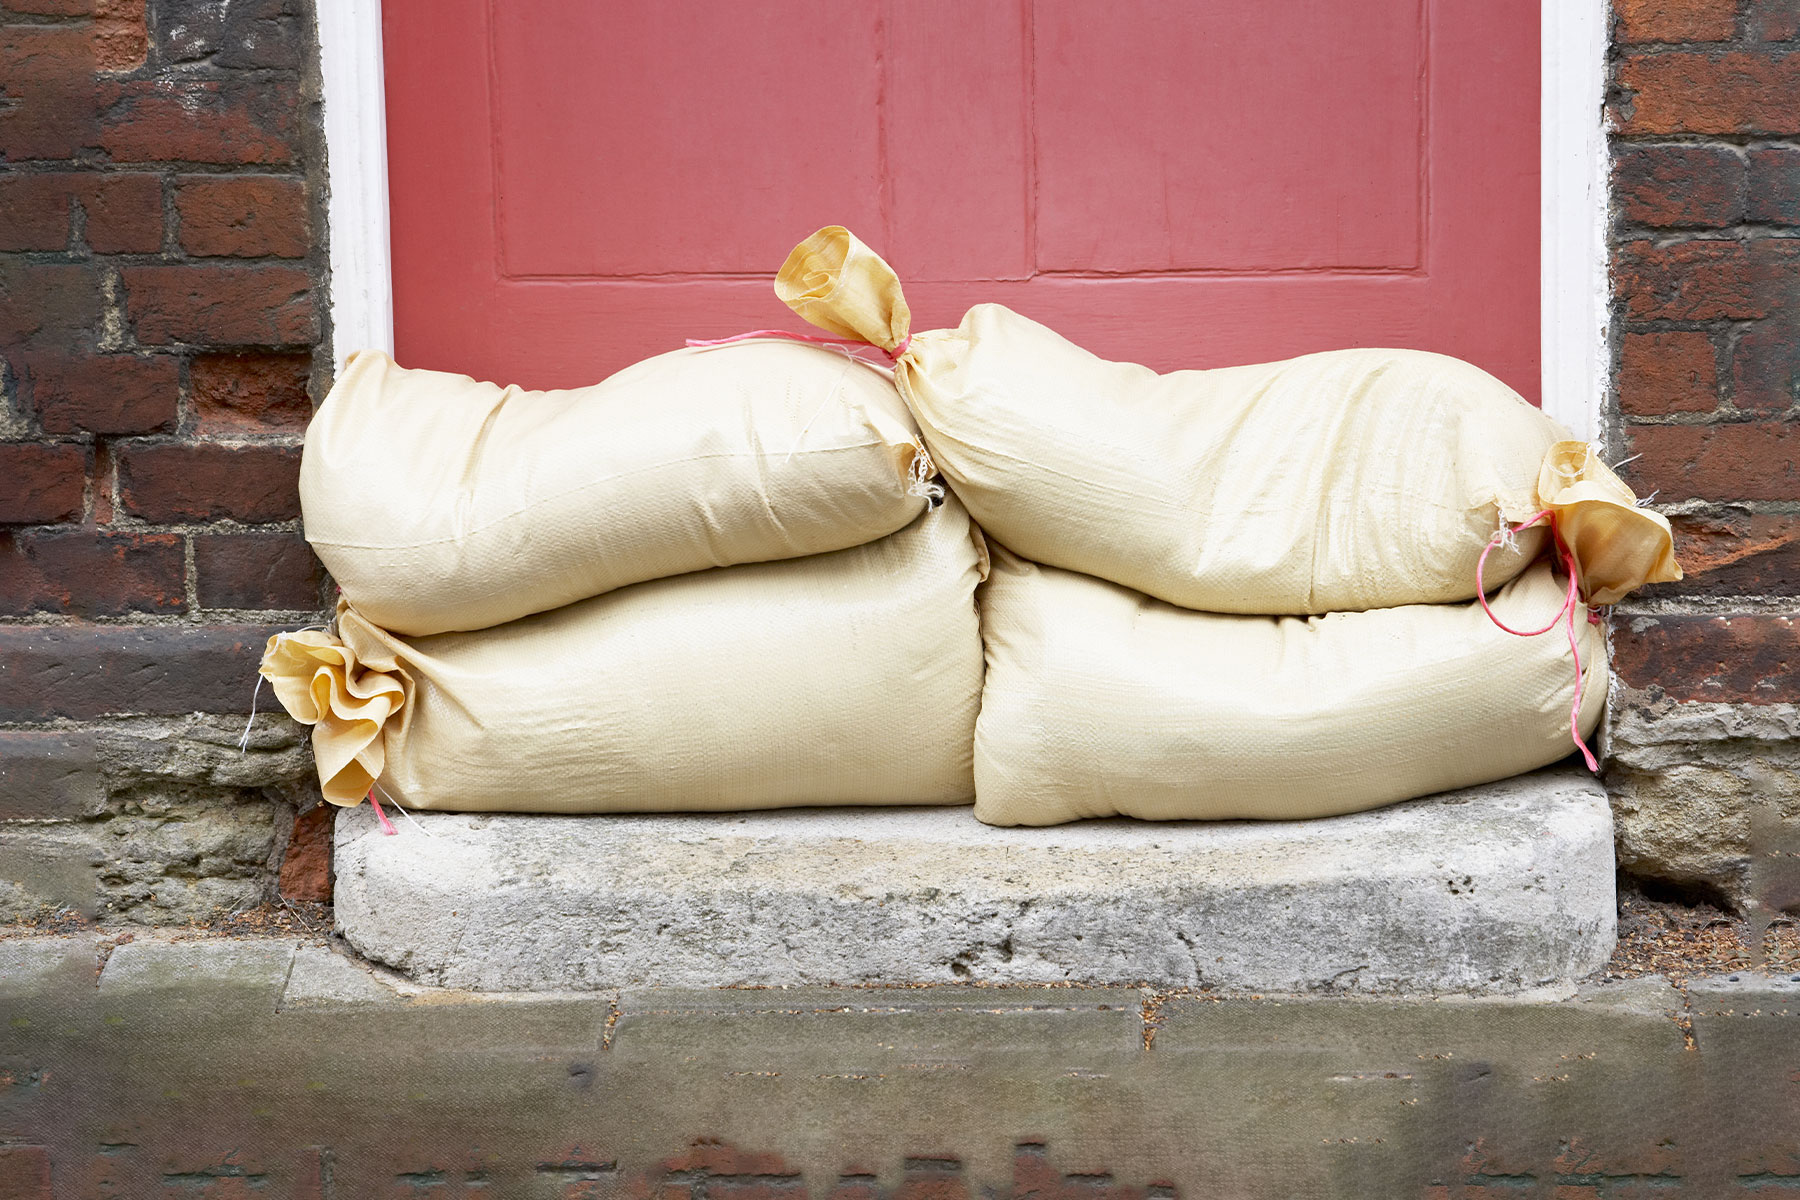 sandbags stacked in front of a red front door